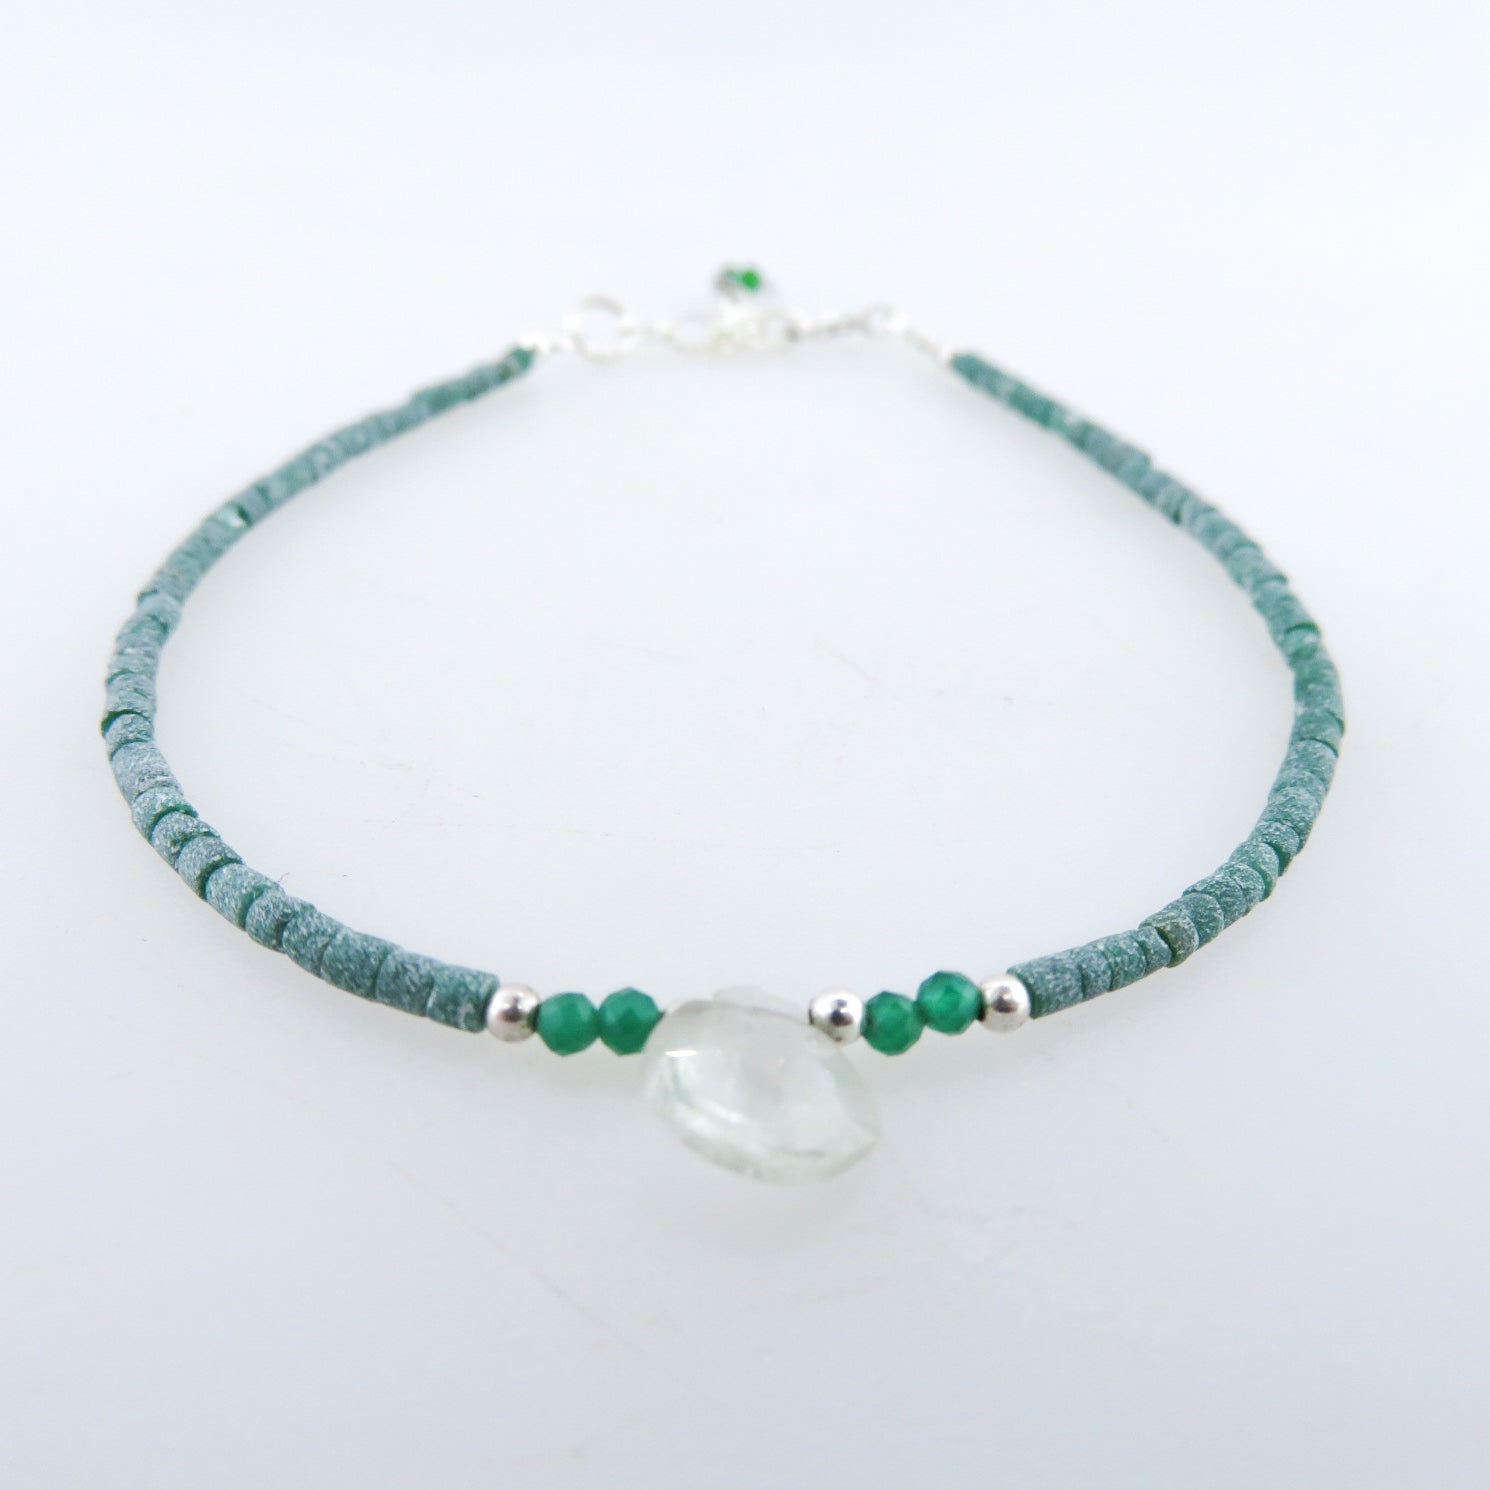 Emerald Bracelet with Aquamarine, Green Onyx and Silver Beads